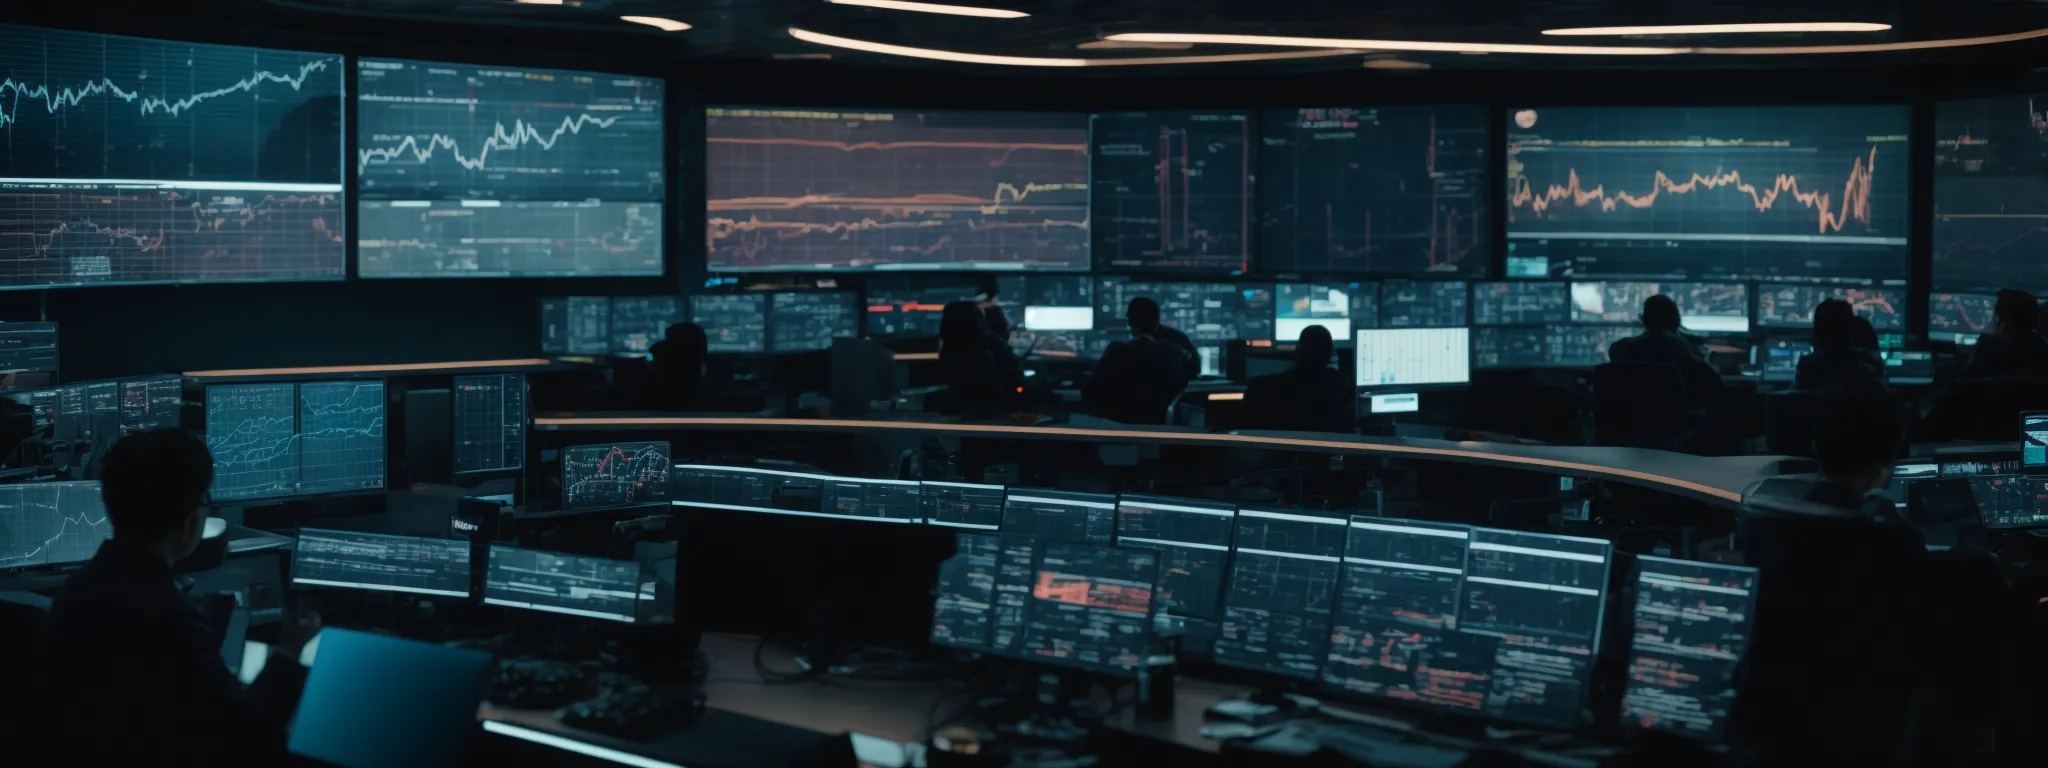 a futuristic control room with screens displaying graphs and data analytics.